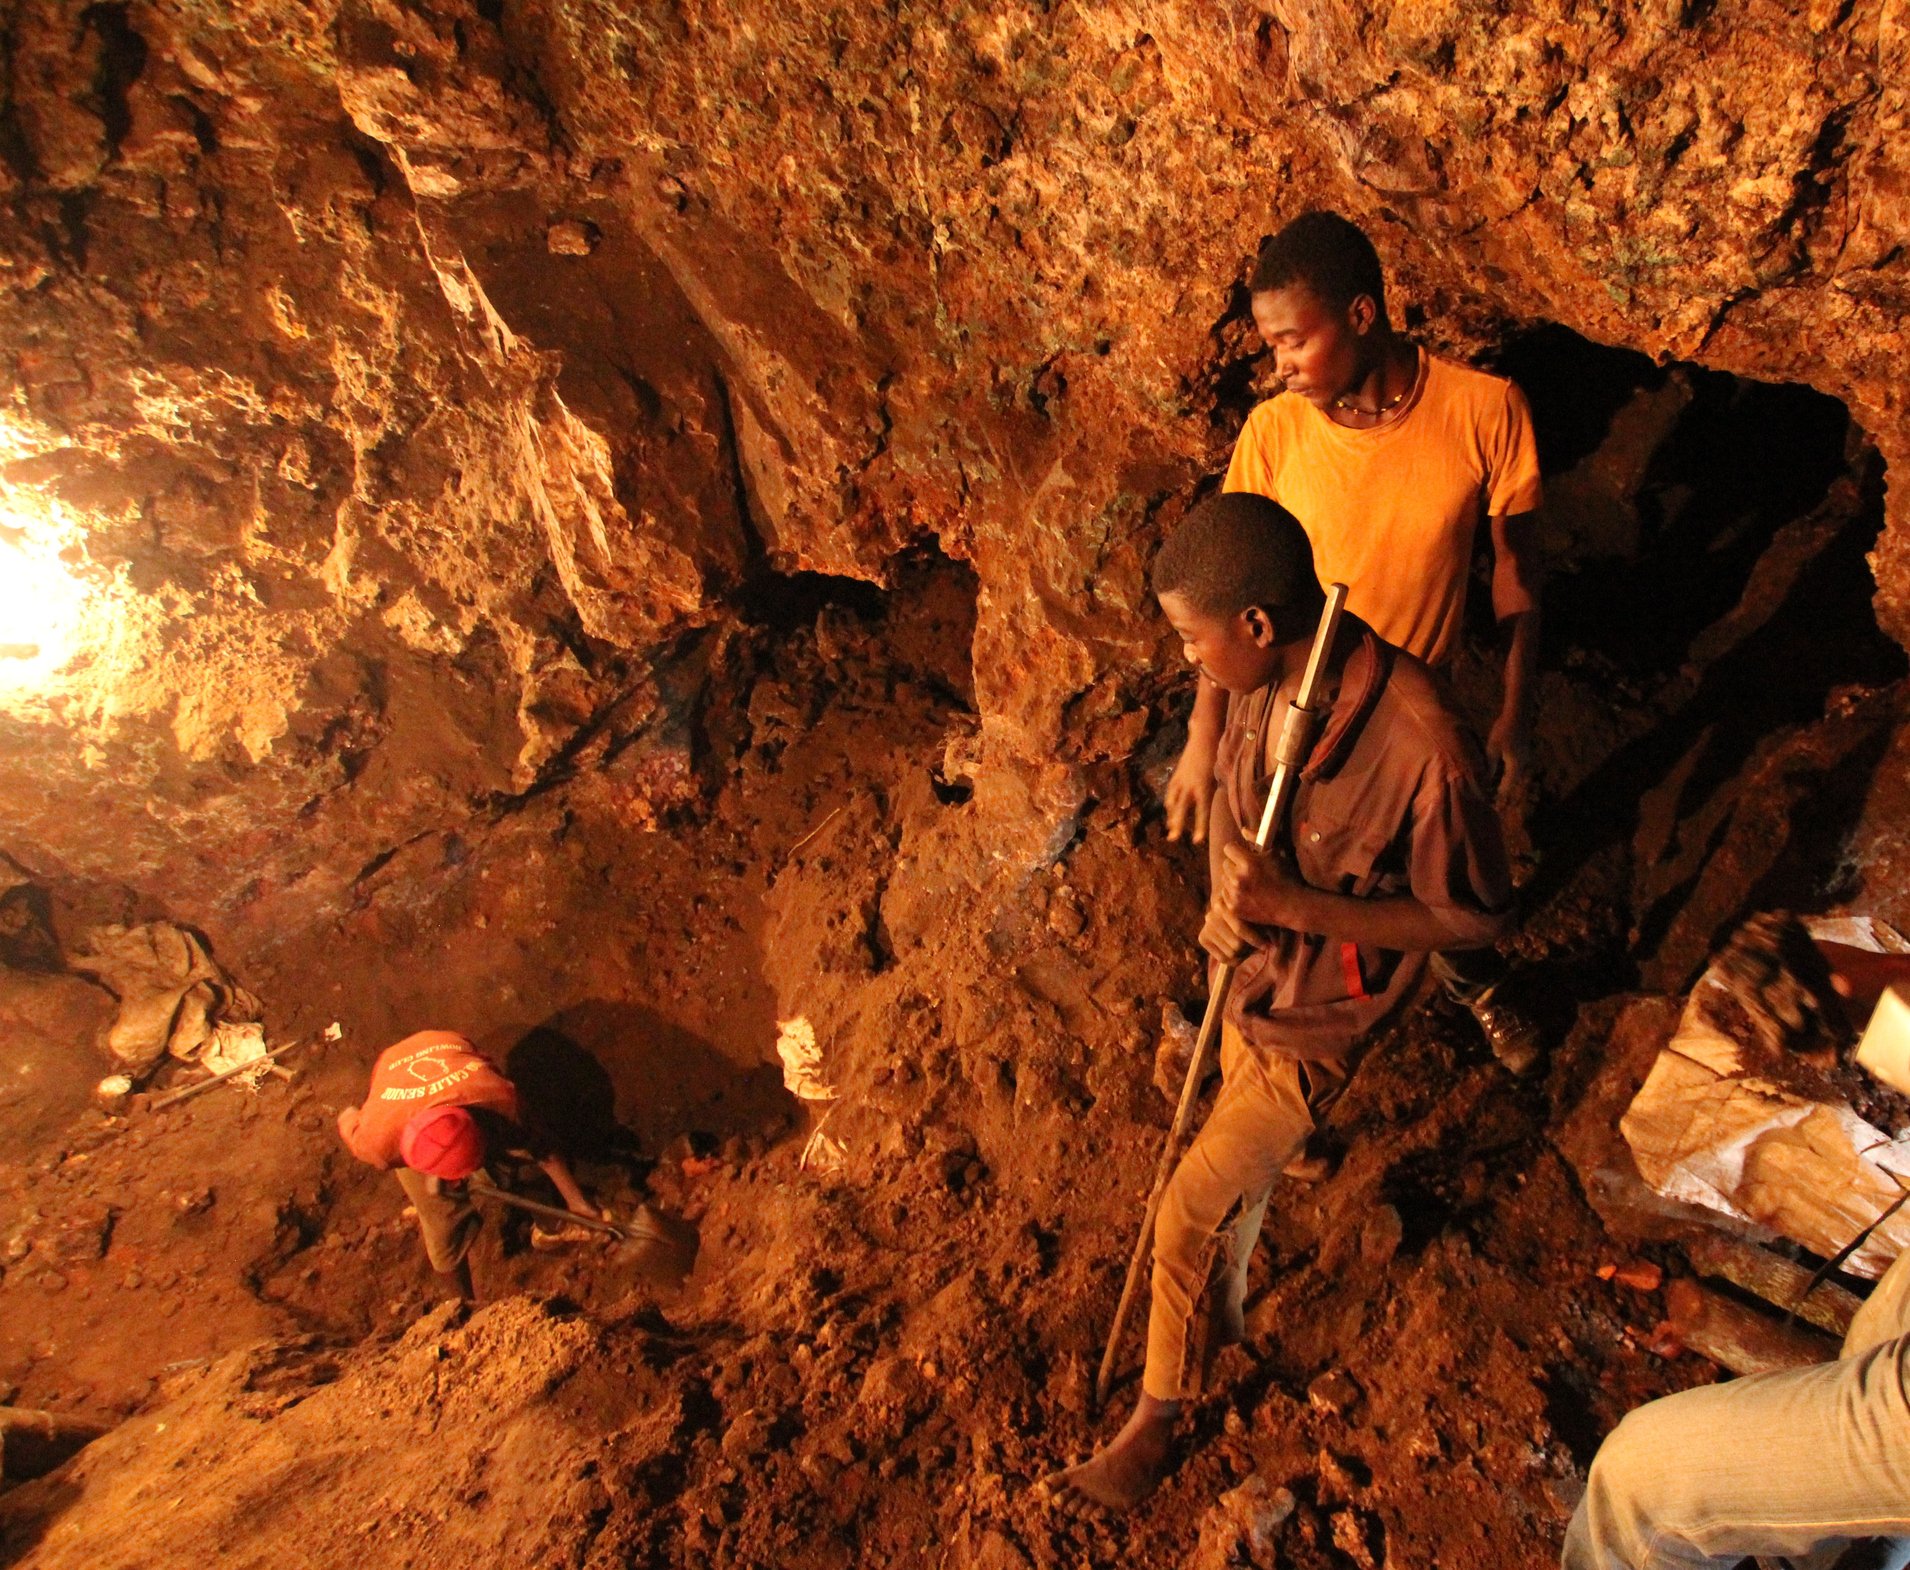 Millions work in artisanal & small-scale #mining. IGF guidance helps governments manage sector: https://t.co/9DizweJBS6 #ShareASM #SustDev https://t.co/ns73LrW4fl